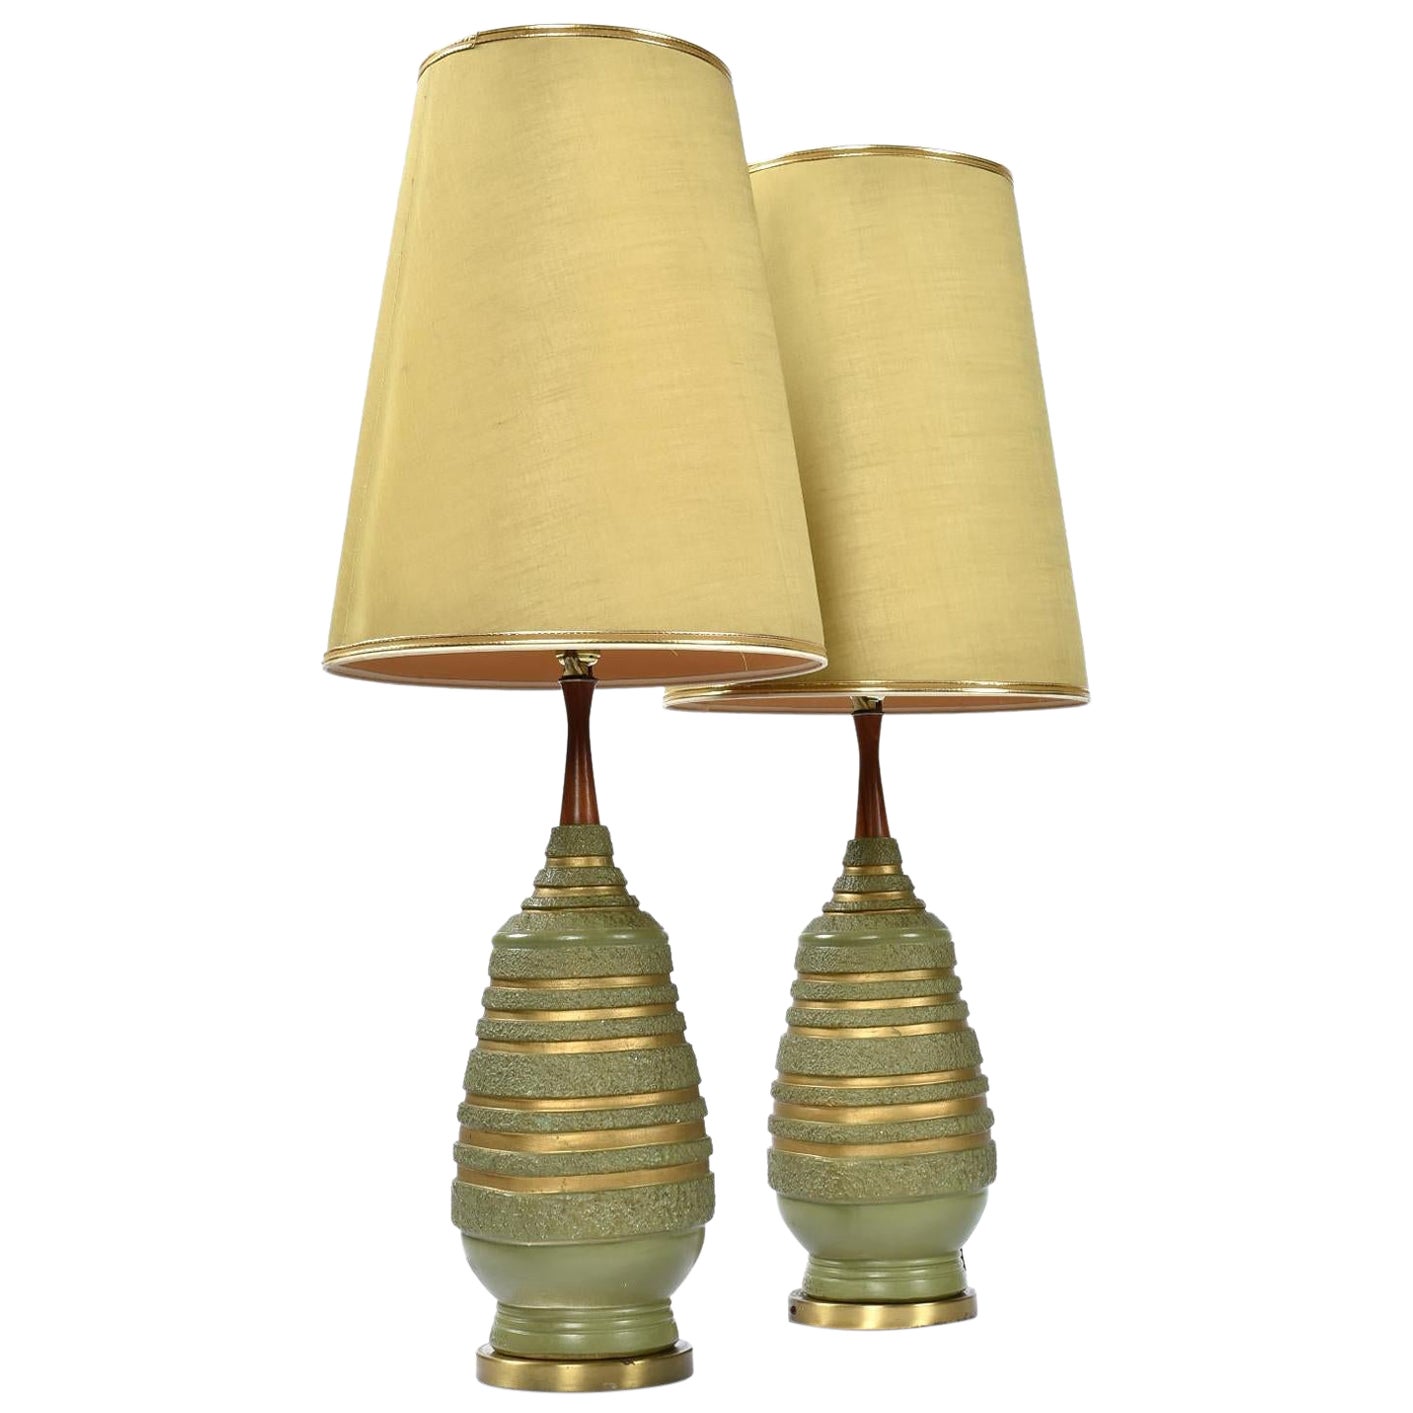 Mid-Century Modern Avacado Green and Gold Plasto Lamps with Original Shades